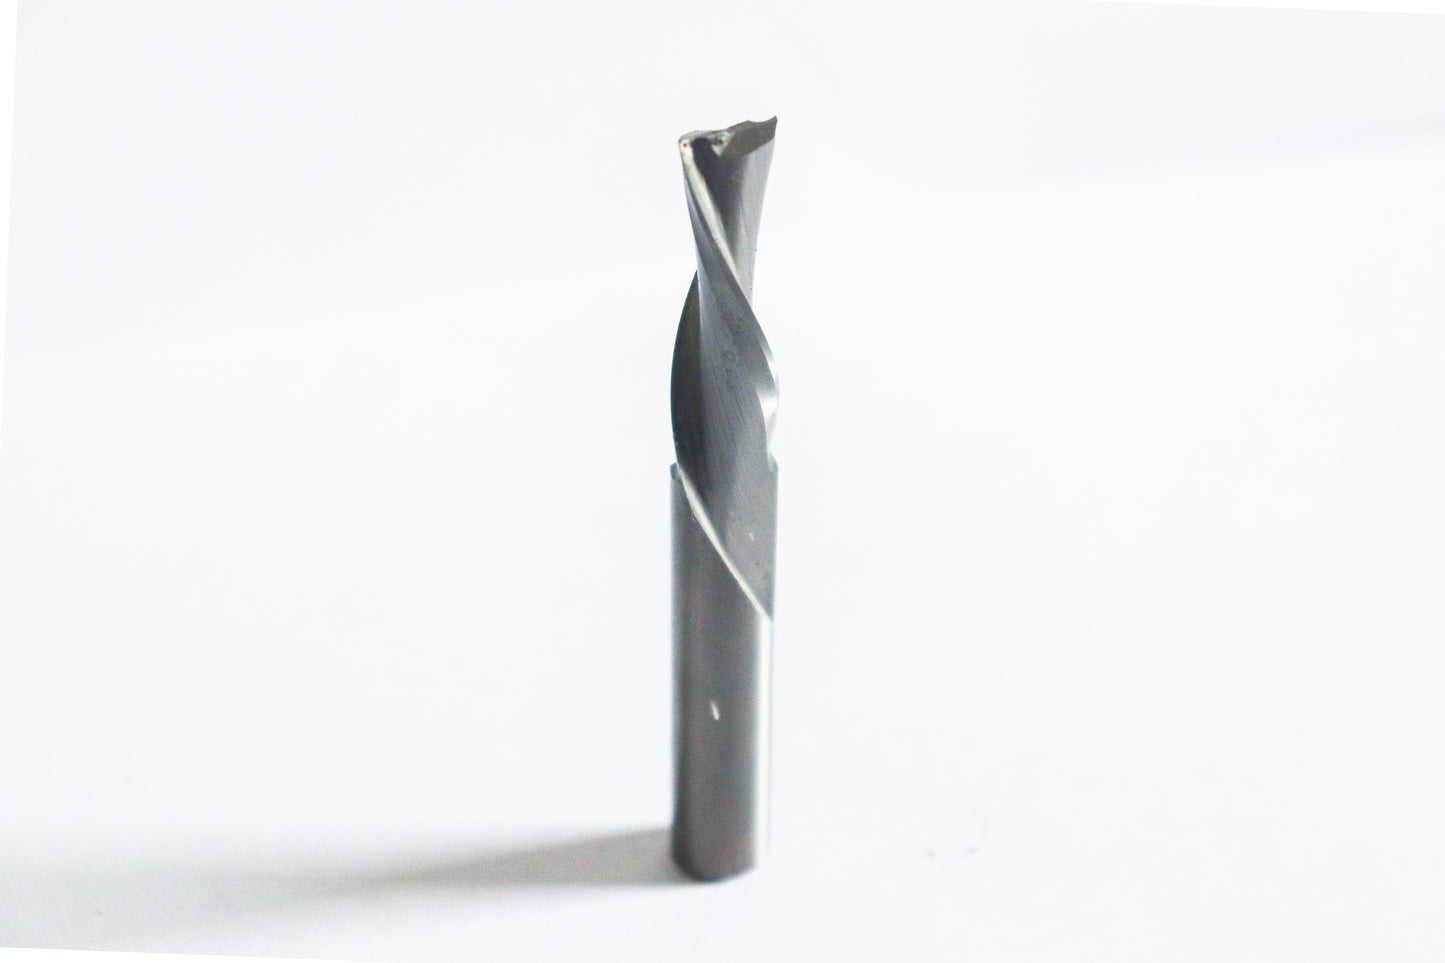 045-2496RX: 2FL Sprial Upcut; 3/4"SH; 3/4"CD; 2-1/2"CL; The RX series of bits last 50% longer than other premium CNC bits.